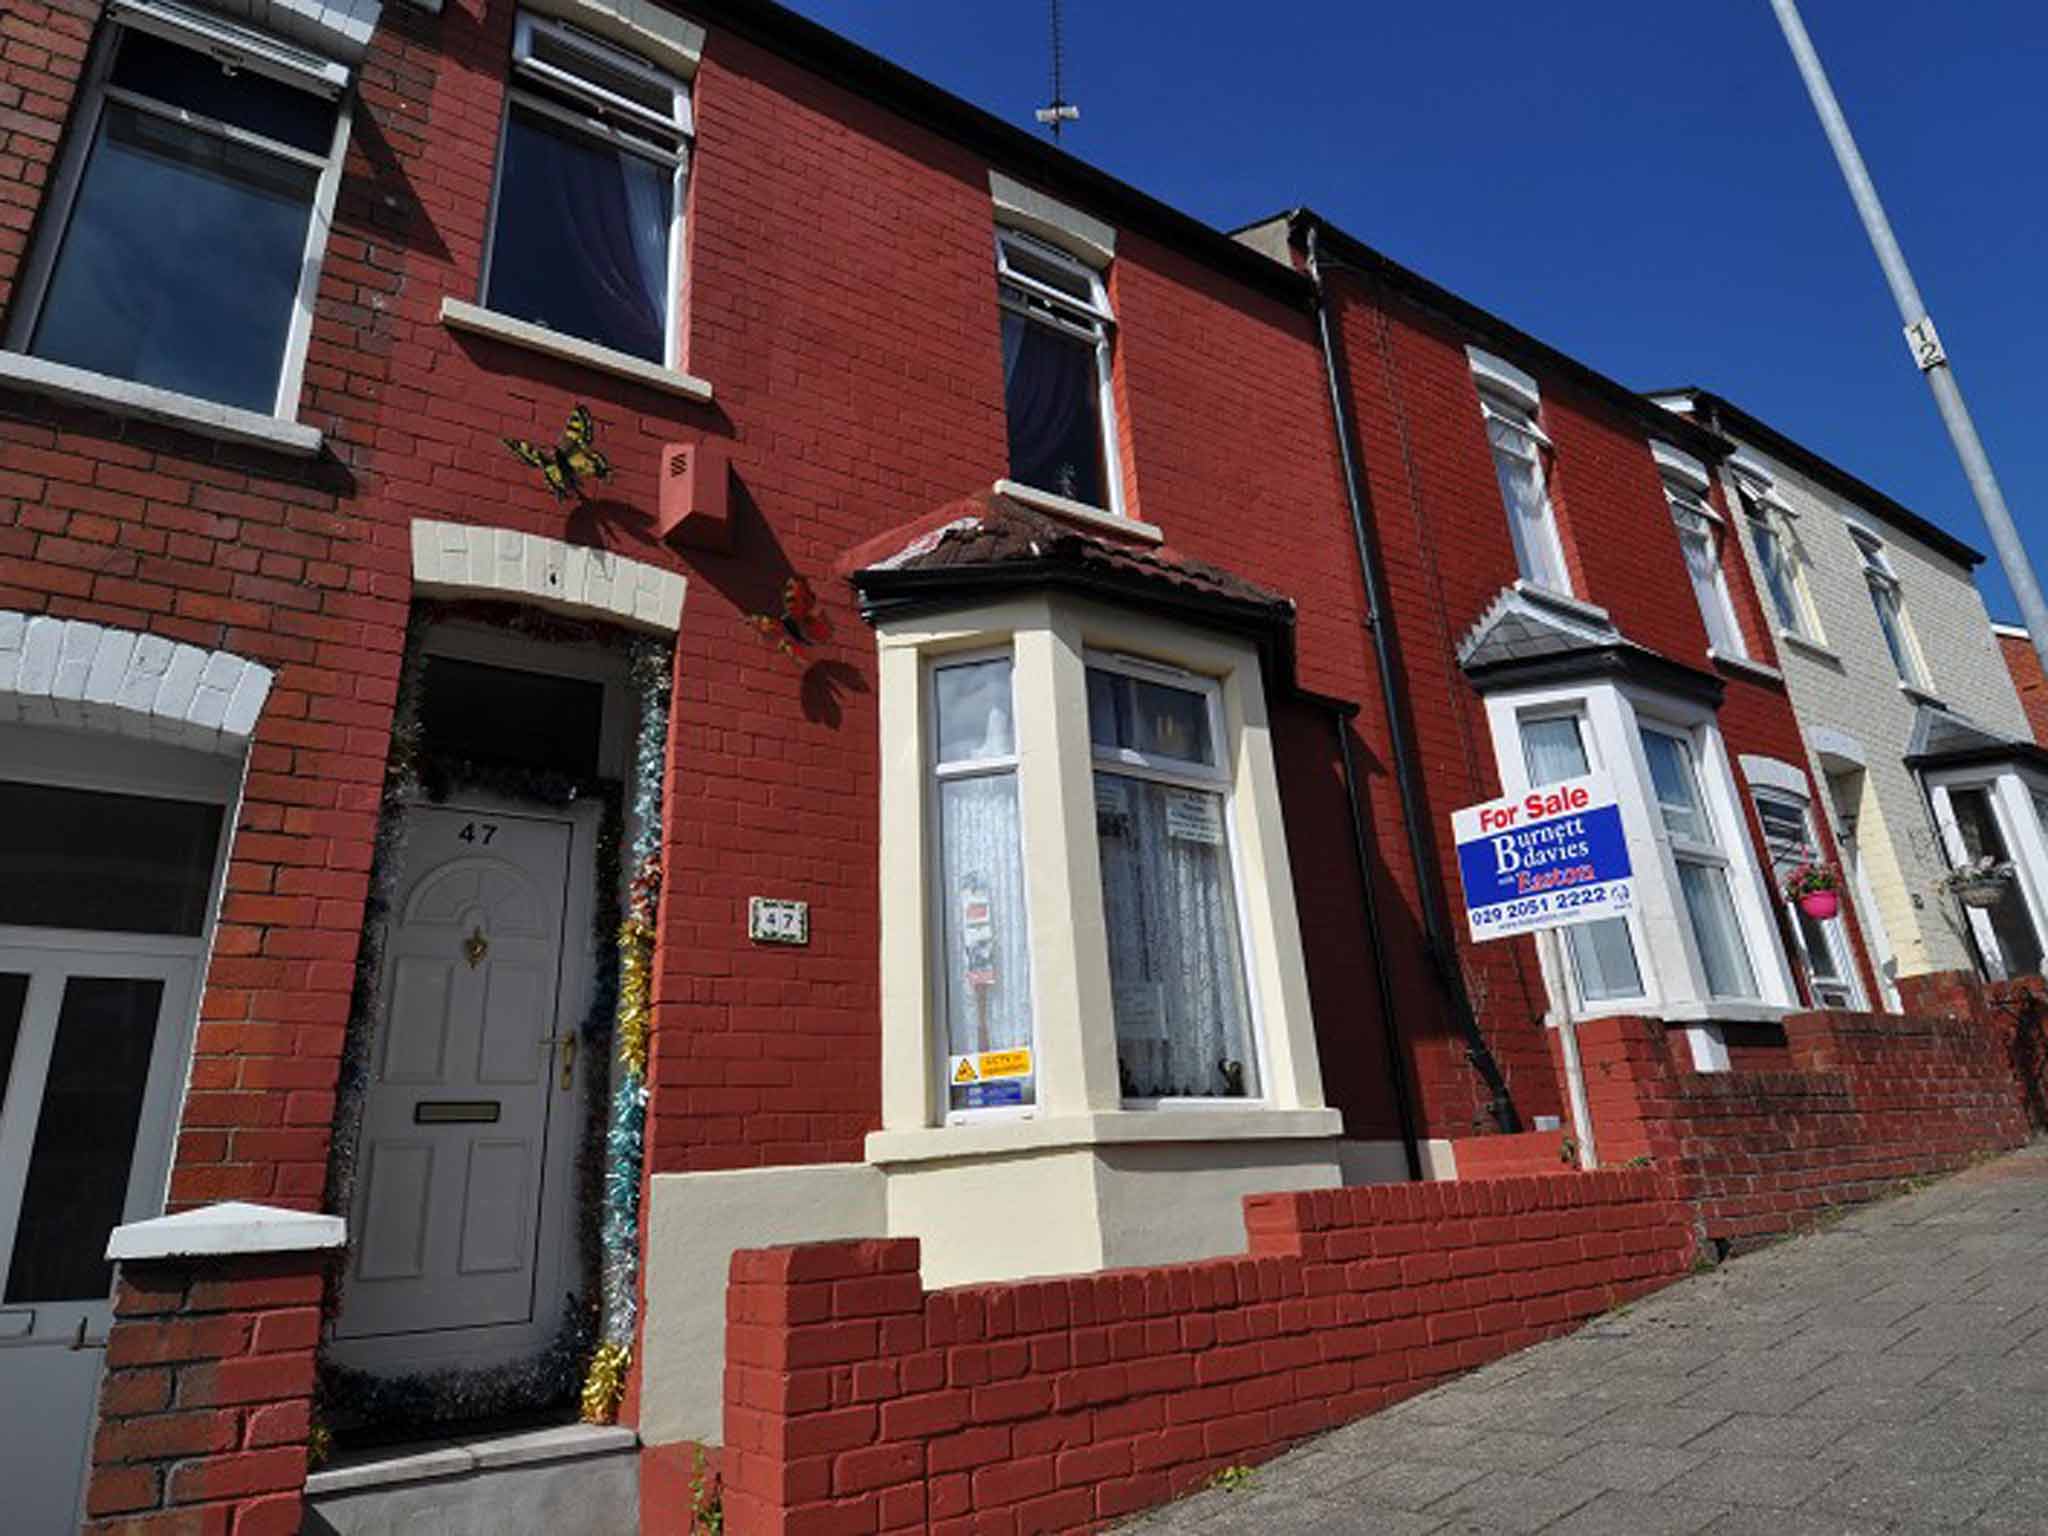 Two bedroom terraced house for sale made famous in television series Gavin and Stacey as Gwen's house. On with Burnett Davies with Easton at a guide price of £125,000